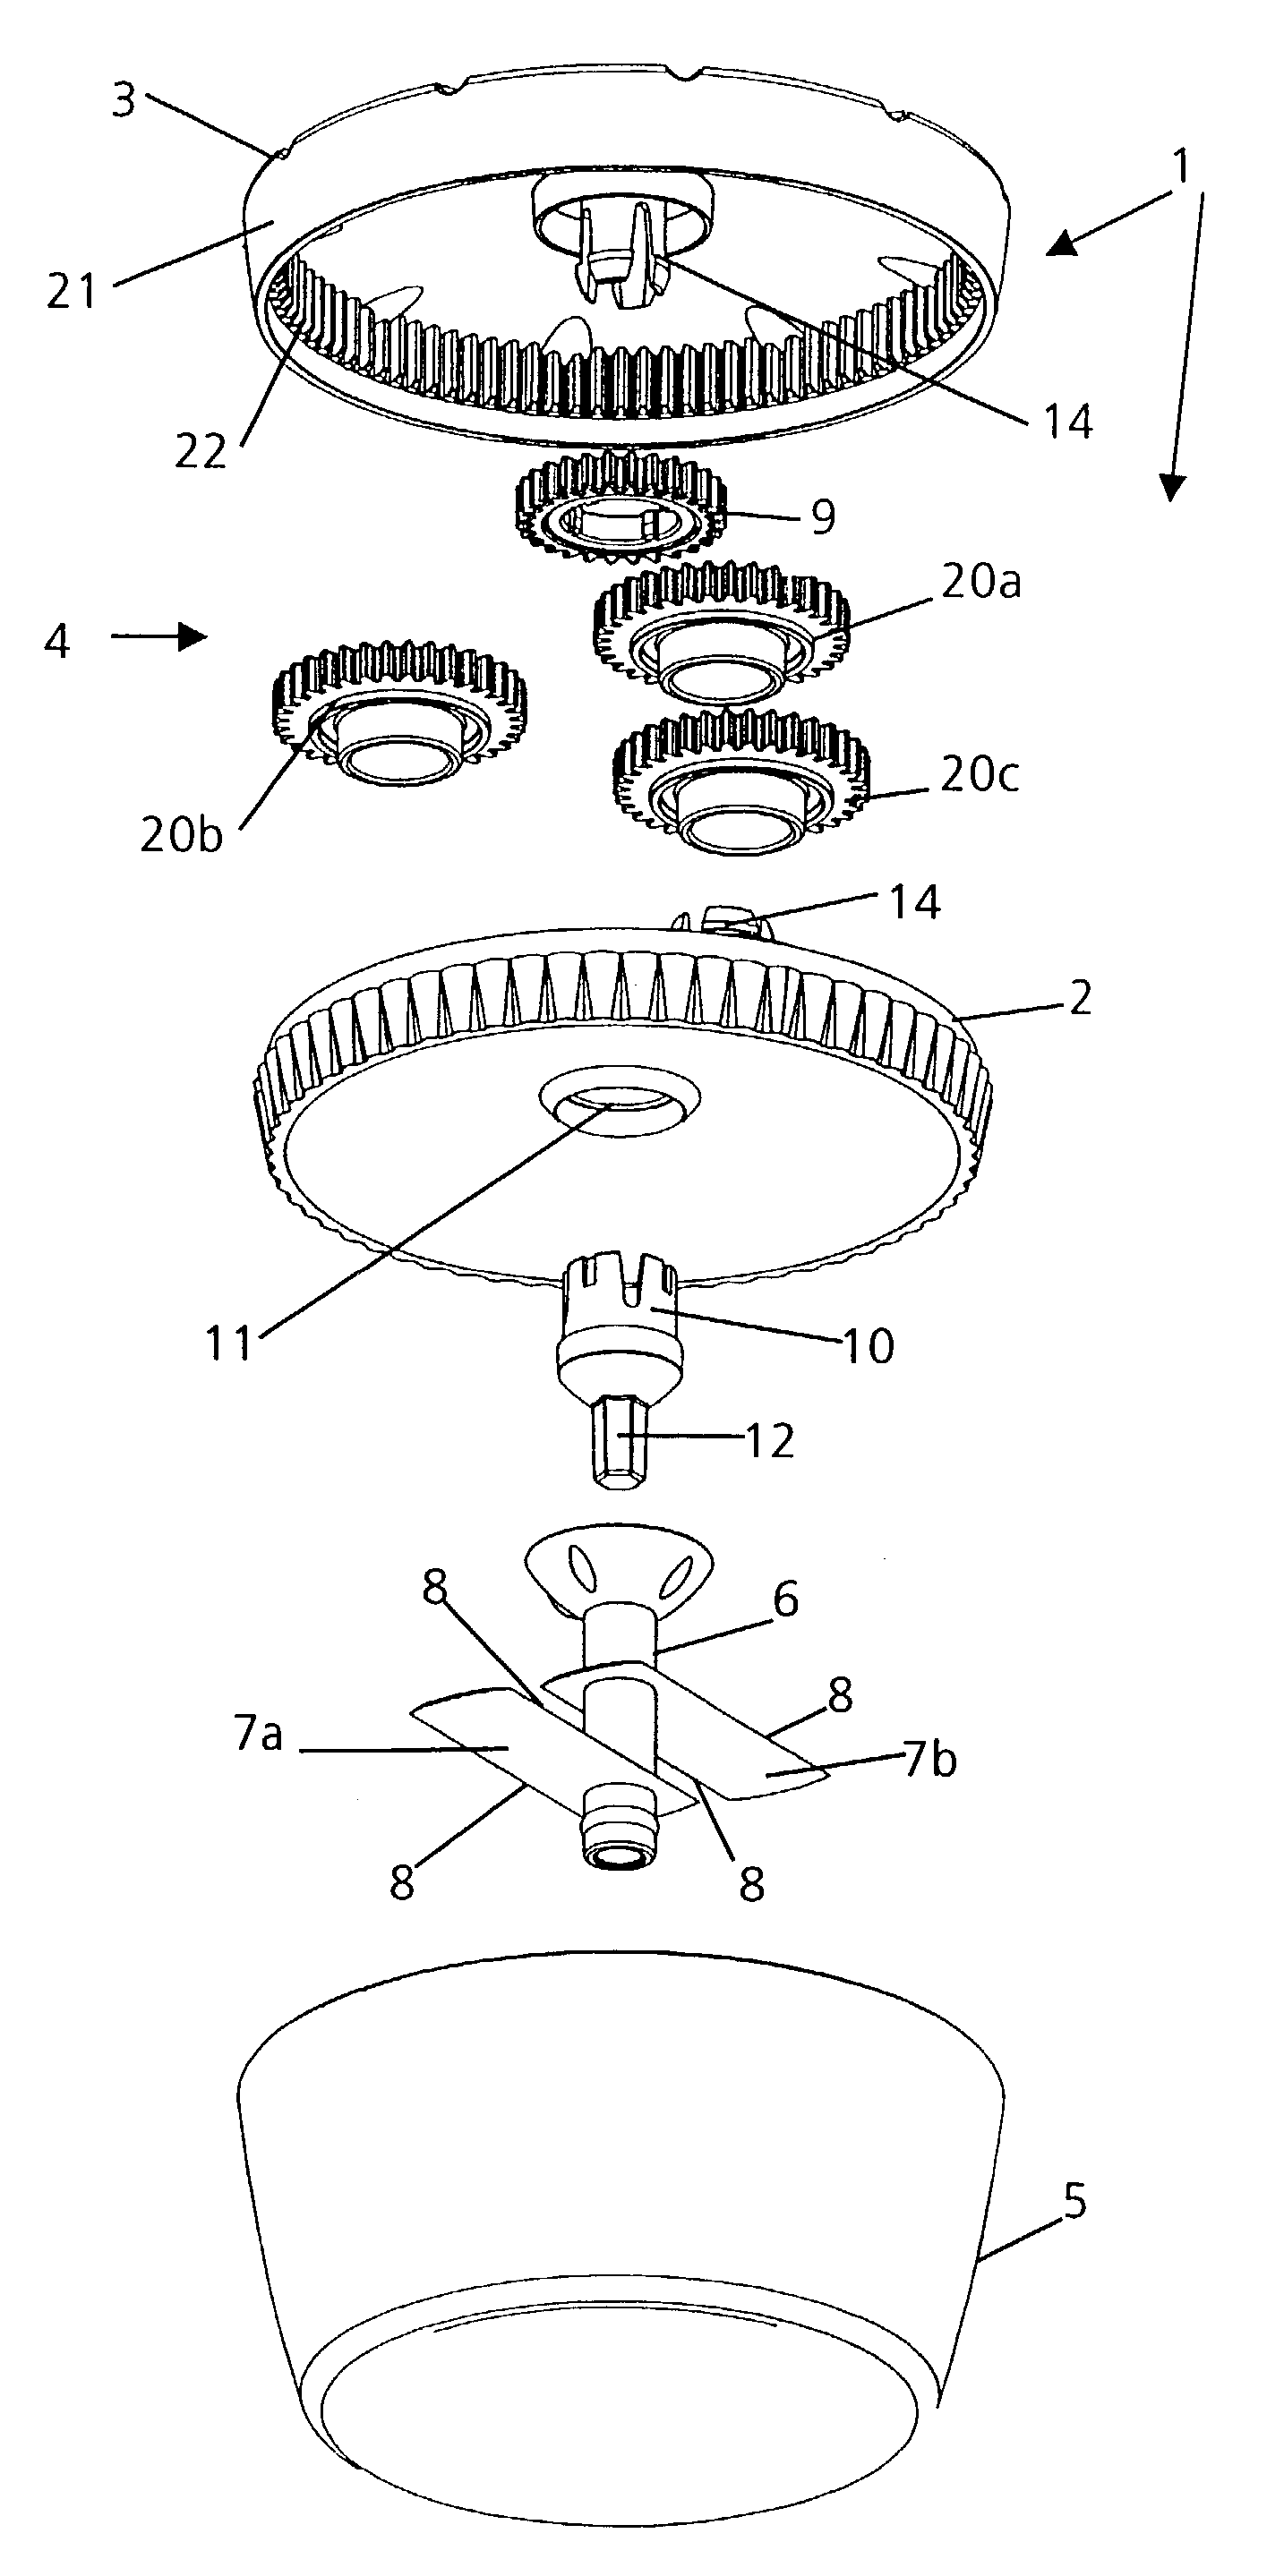 Manually drivable apparatus for comminuting foods